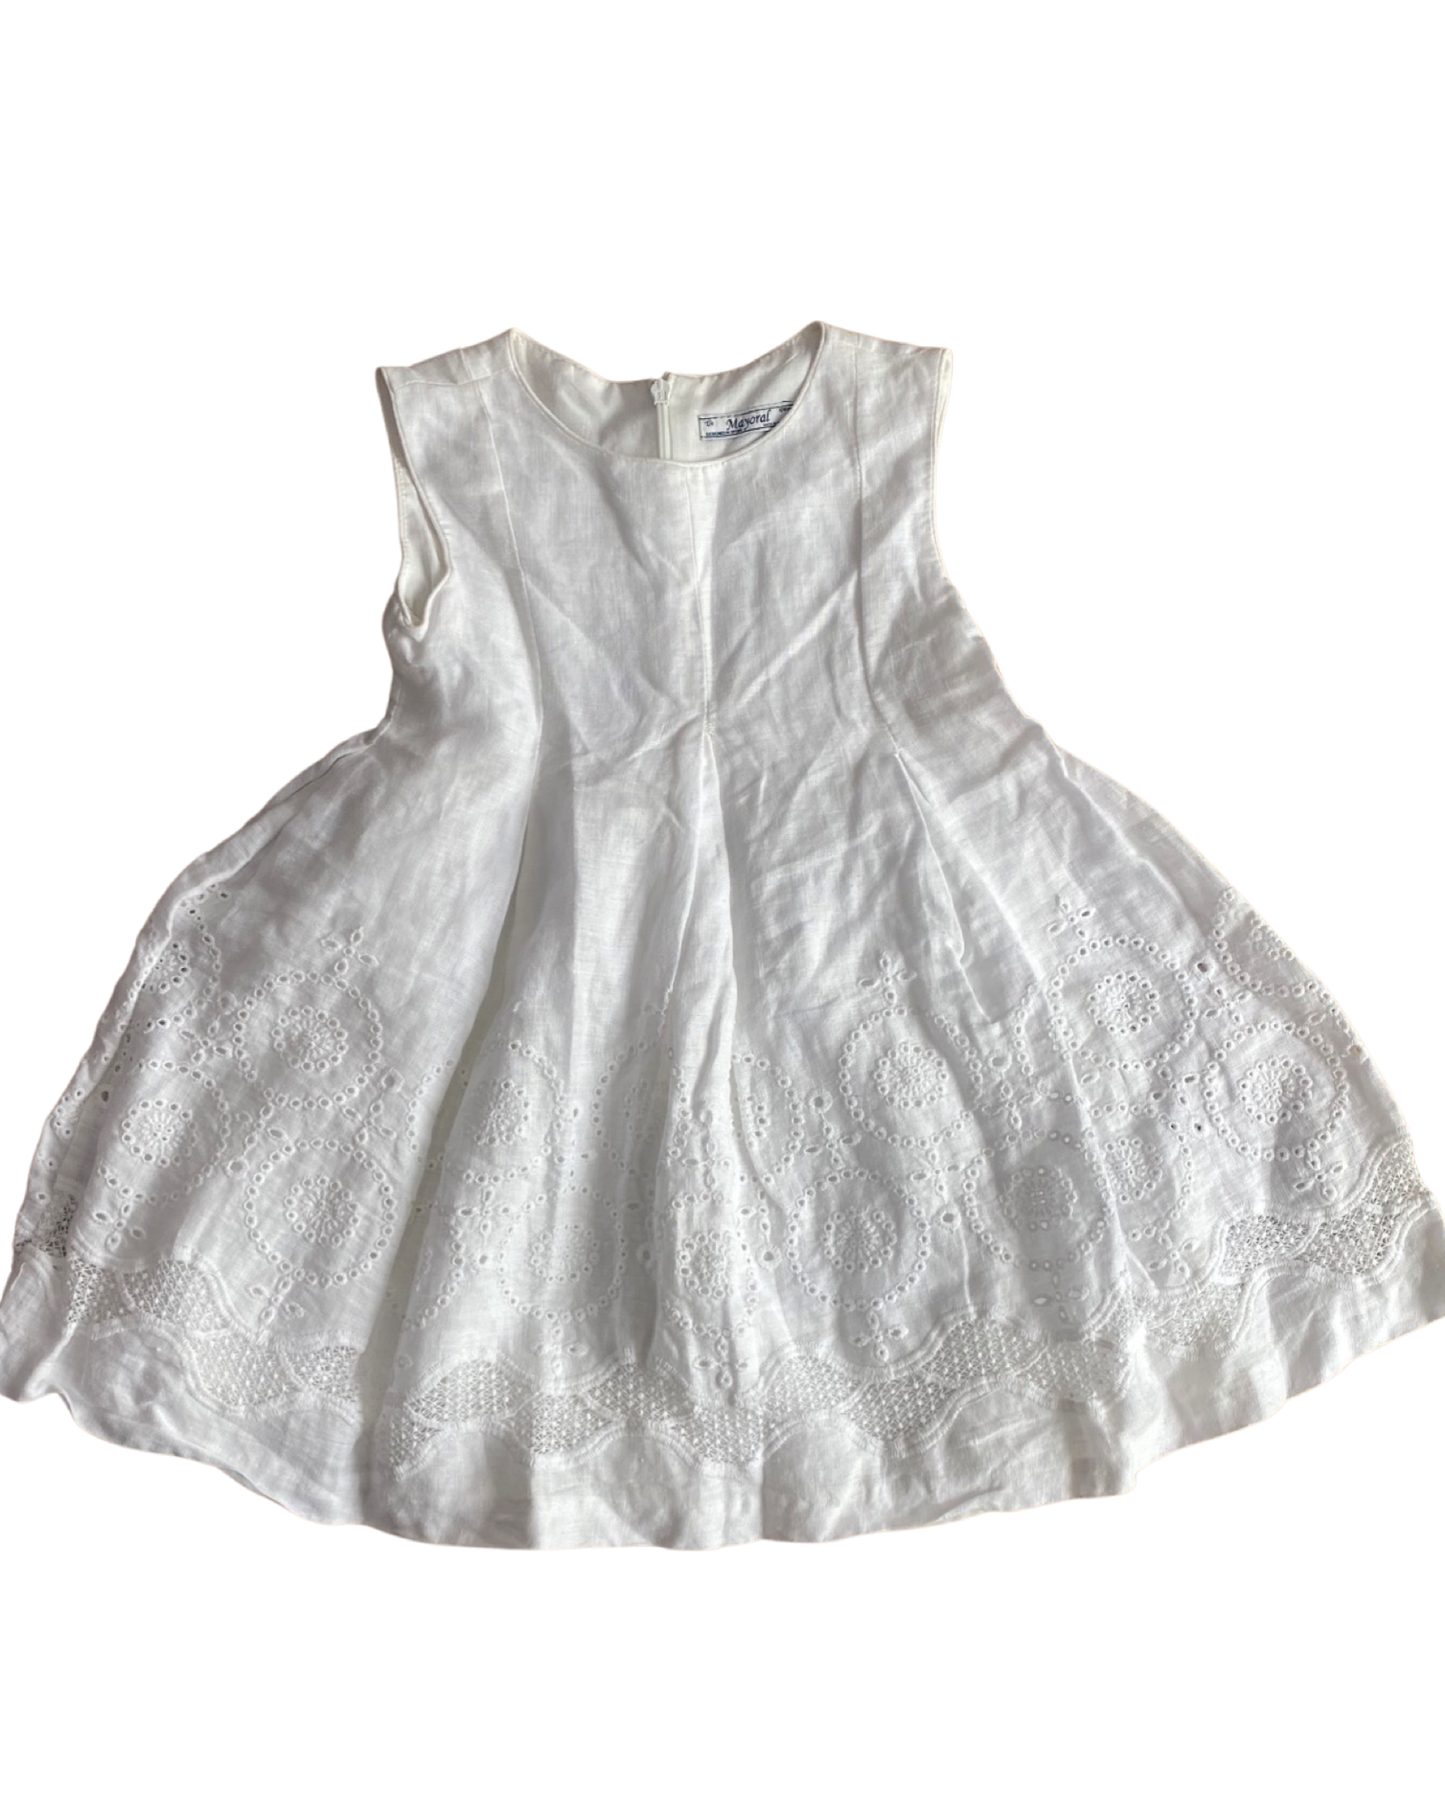 Mayoral white linen dress with eyelet lace trim (3-4yrs)